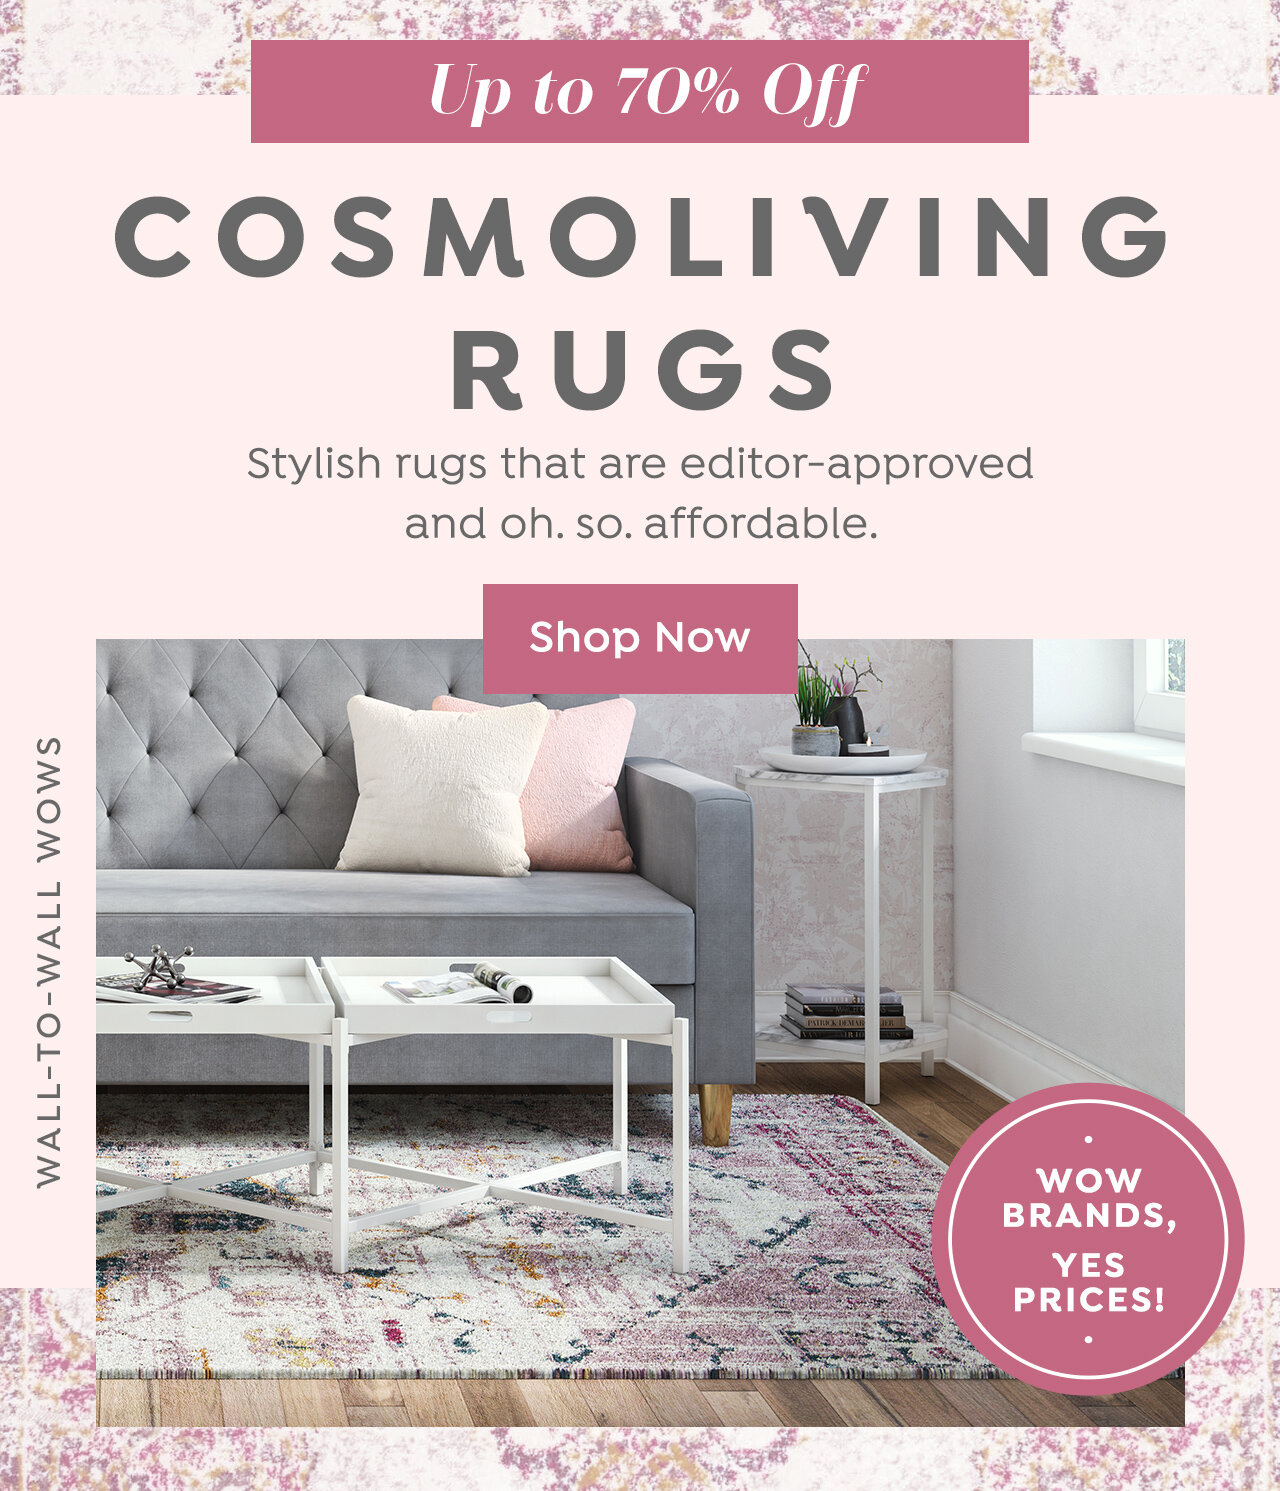 Rugs up to 70% off